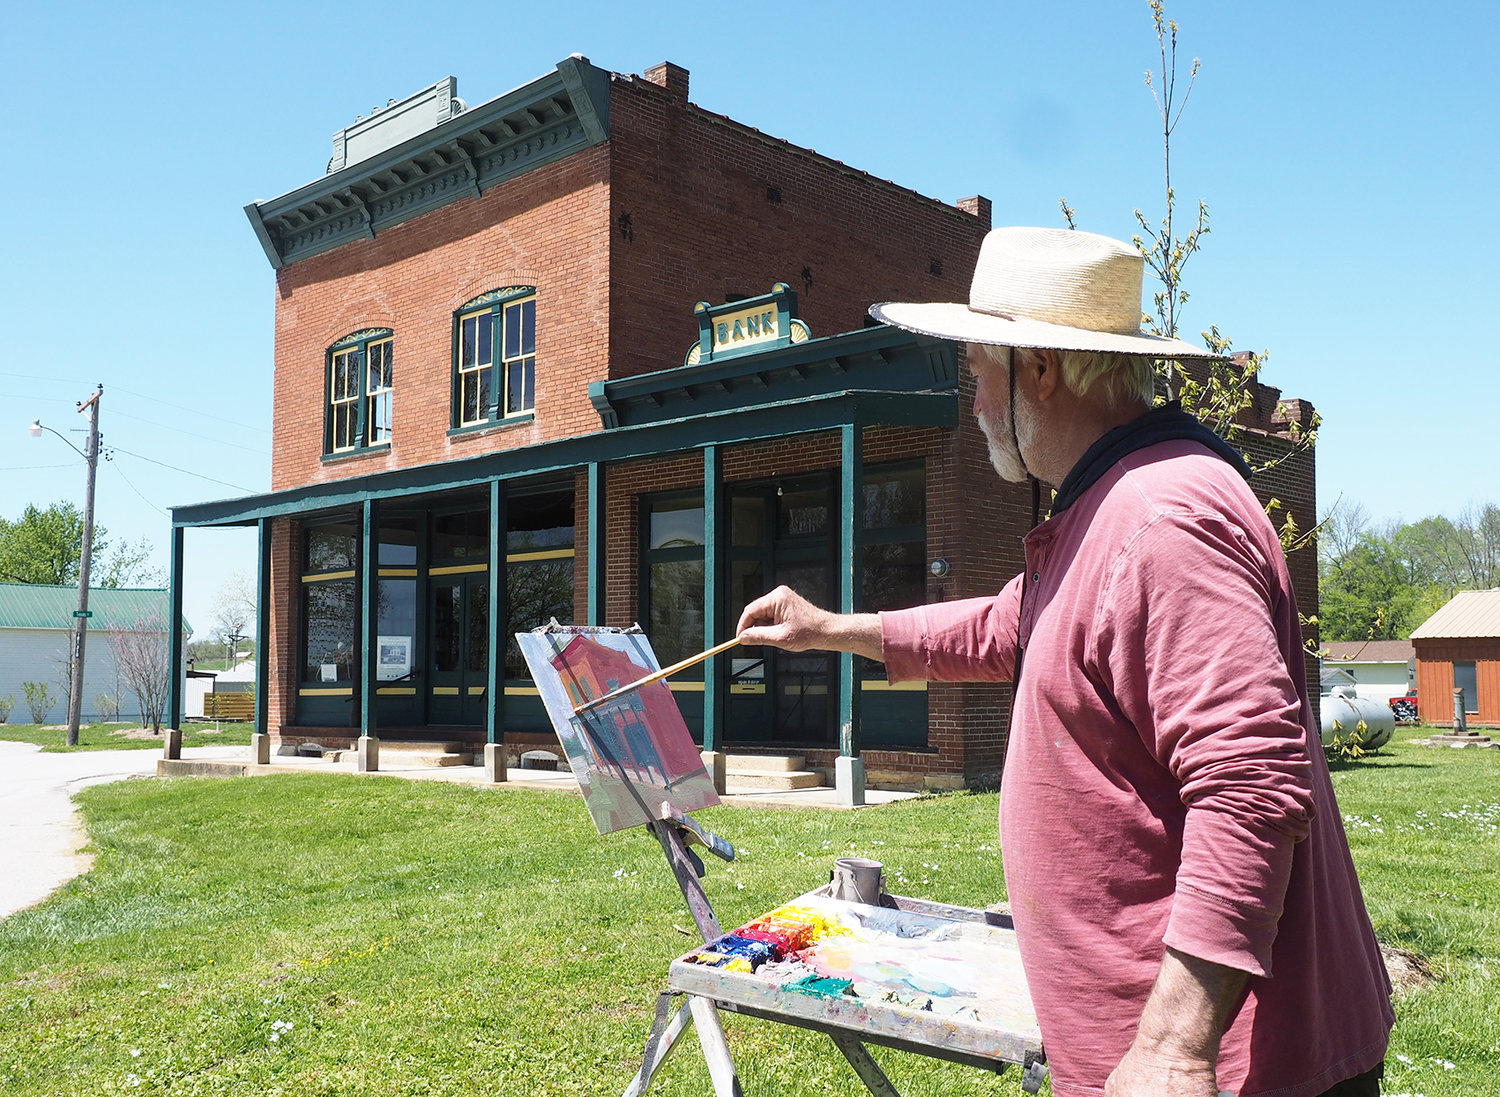 ARTIST VISITS TRELOAR — Artist “Billy O” O’Donnel, of Burns Mill, uses the Treloar Mercantile as his subject in a recent visit to the Country Store Corridor. He is the founder of Artists Along the Katy Trail project and is known as one of the top plein air painters. The Treloar Mercantile was just listed on the National Register of Historic Places.